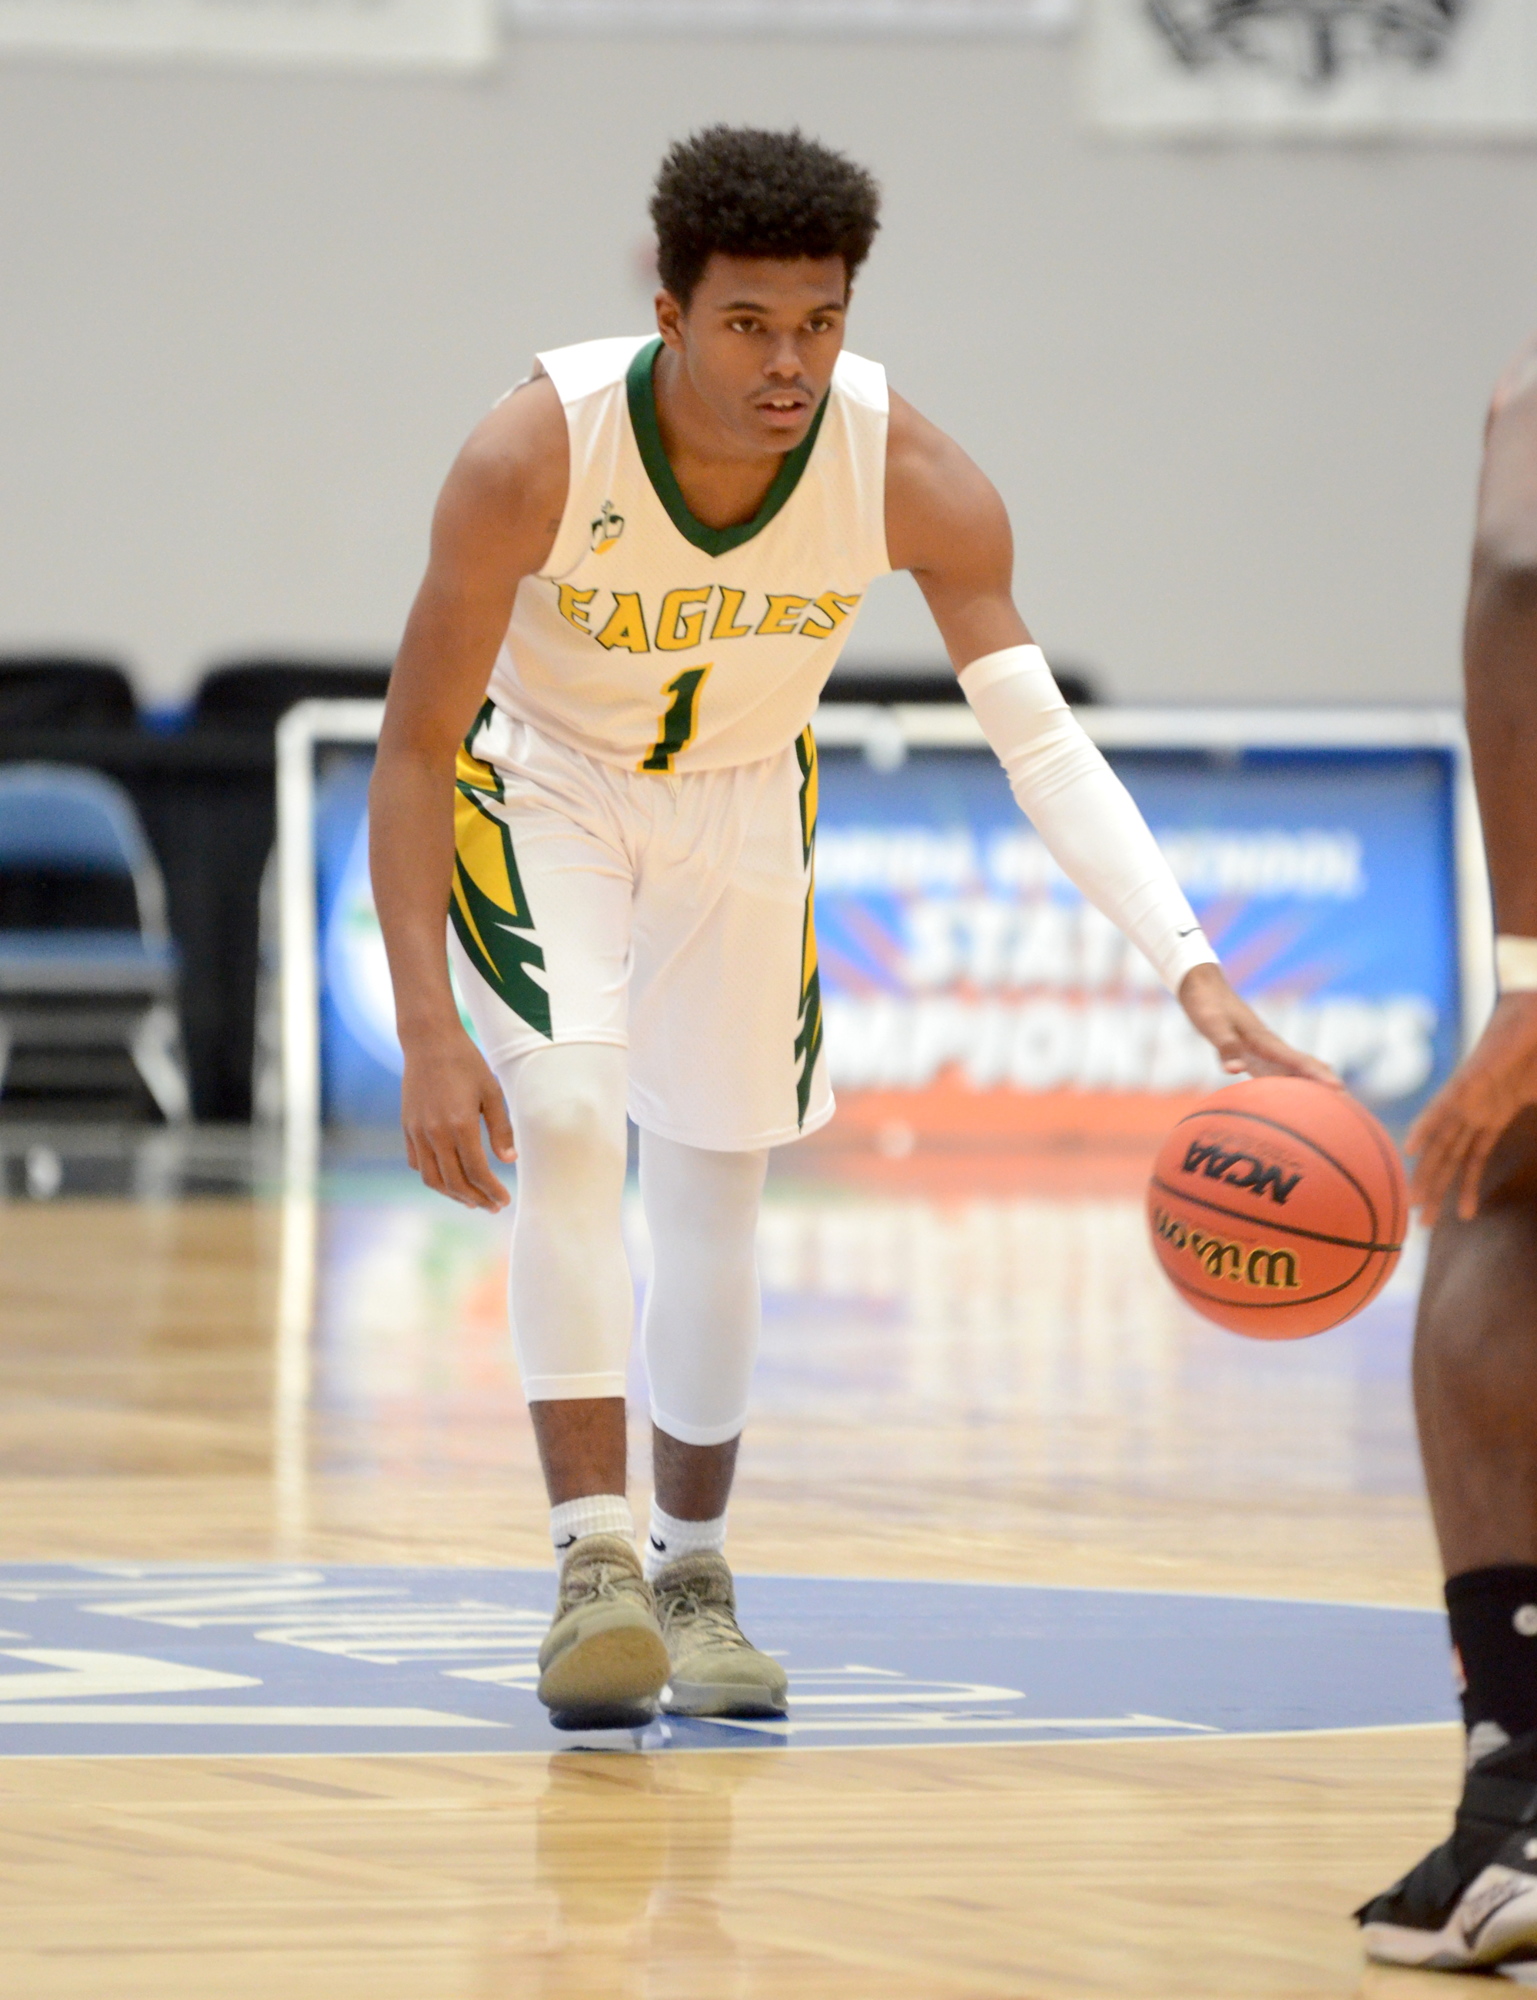 Under the new proposal, CFCA and West Orange boys basketball — both of which made it to Lakeland this past spring — would compete for the same state title.